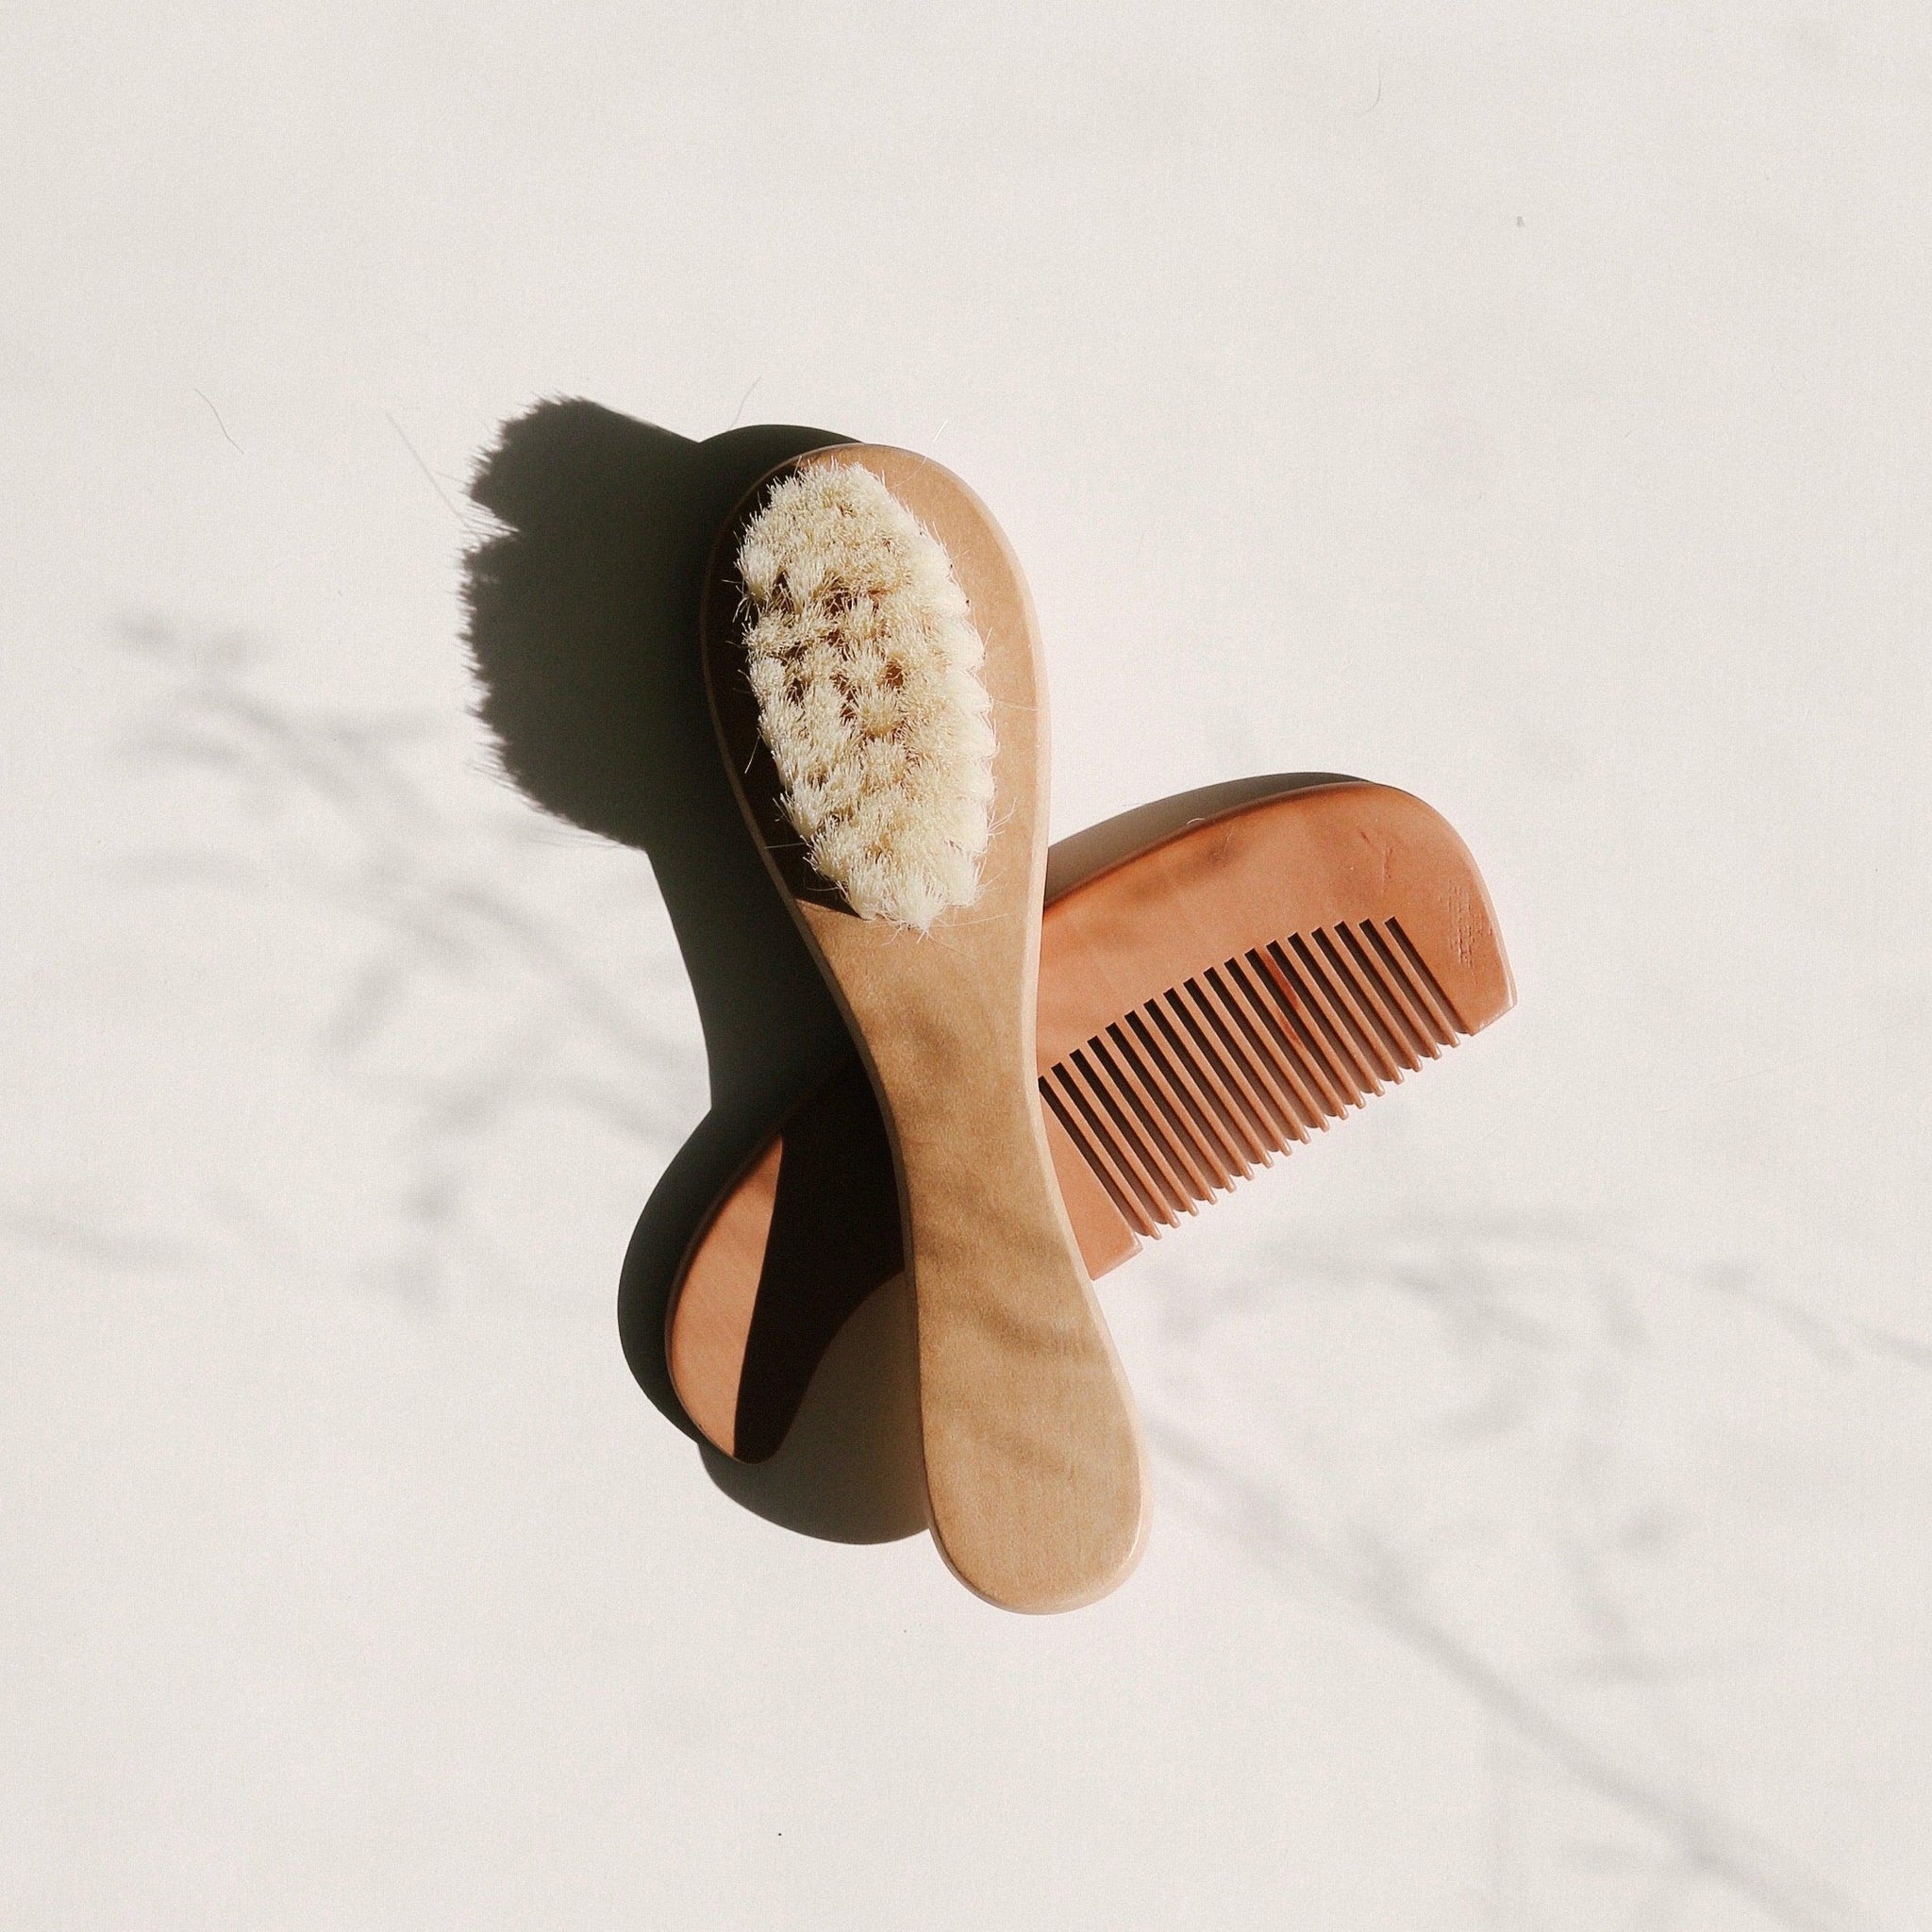 Our gorgeous Hair Brush & Comb Set is super soft. Perfect for your baby's delicate crown. Both the brush and comb have curved, wooden handles for easy and comfortable grip. 